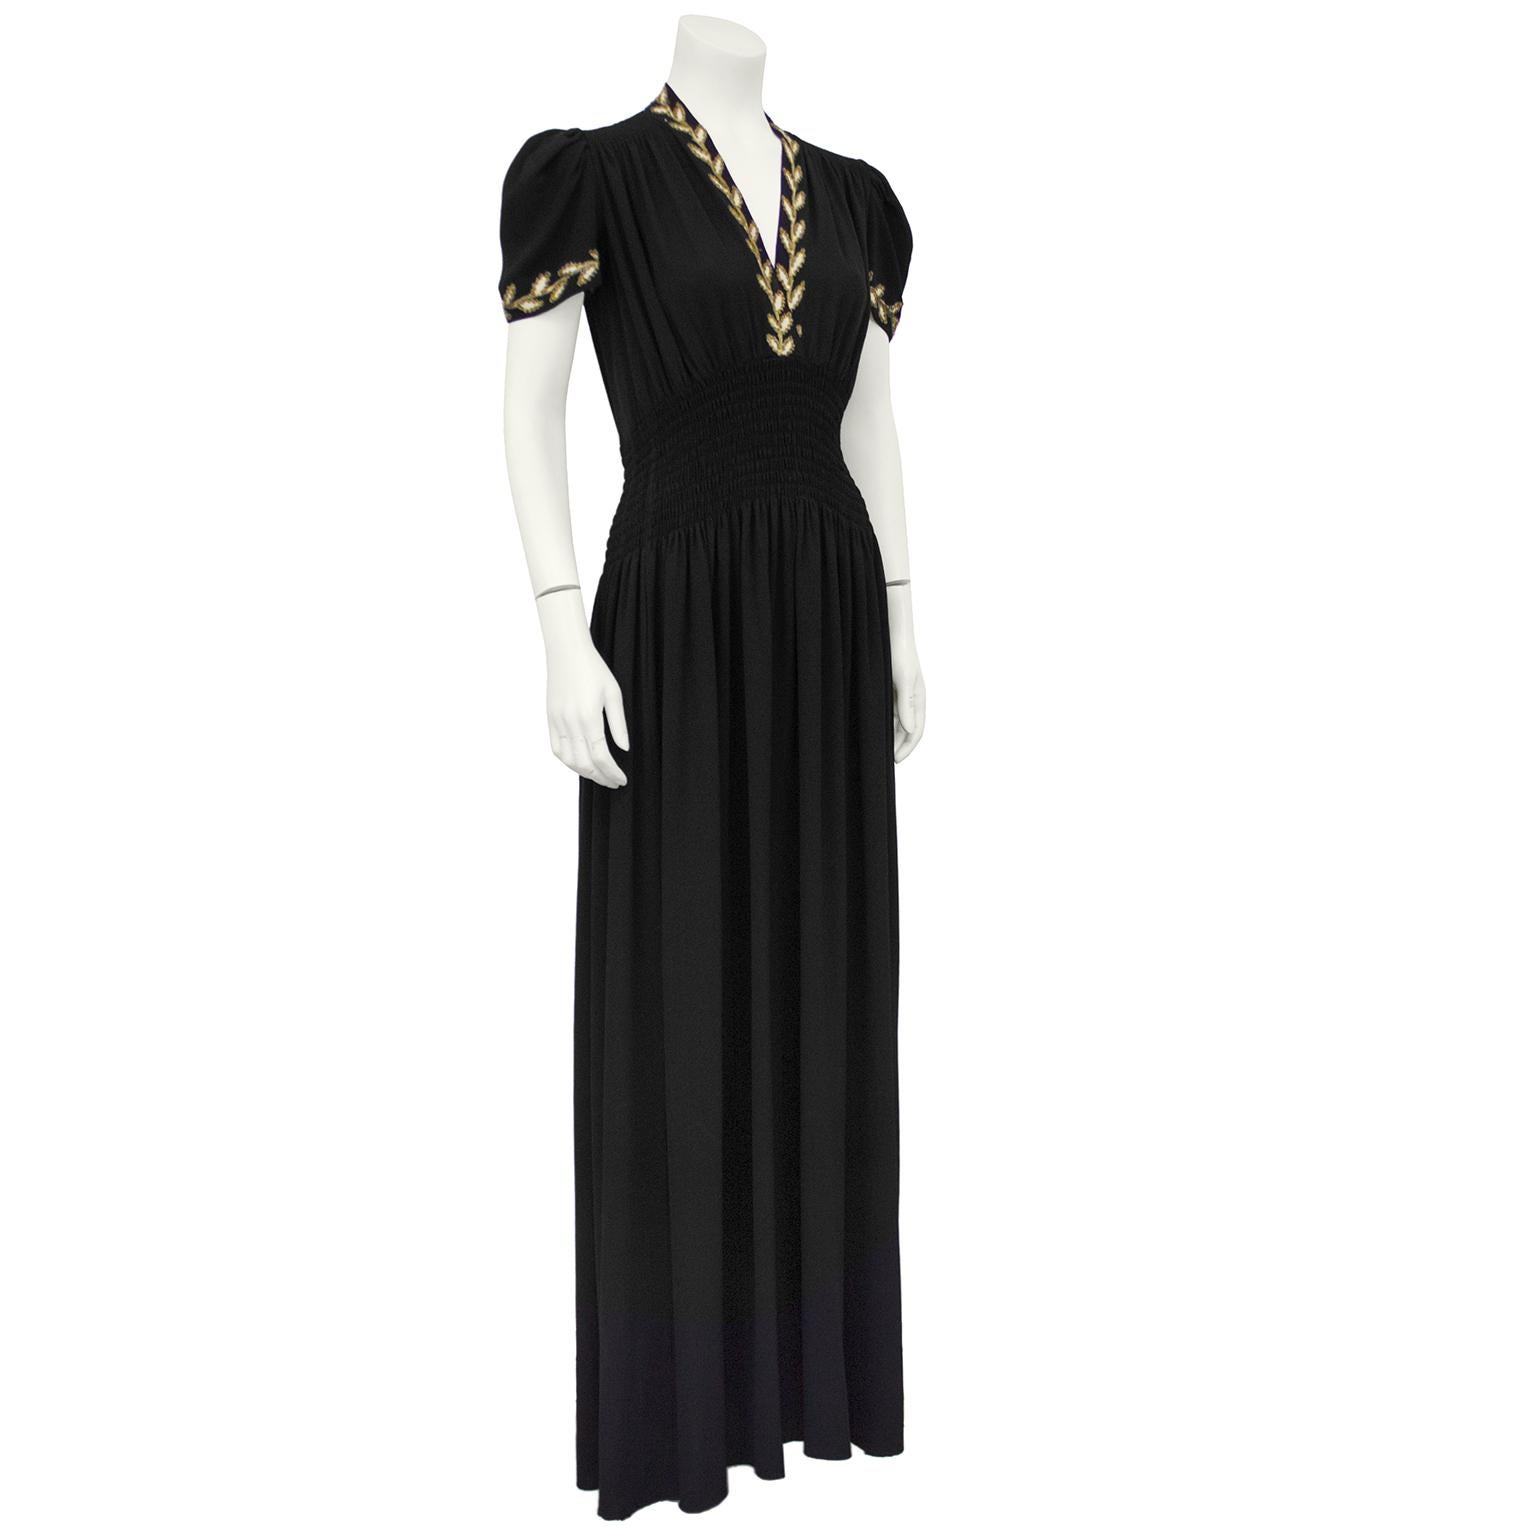 Timeless 1930's miss crepe and gold embroidered evening dress with slightly gathered shoulder and hand rouched wide waistline.  Elegant V neck and short sleeves are trimmed in hand sewn gold and white garland leaves. The fit of this silhouette is